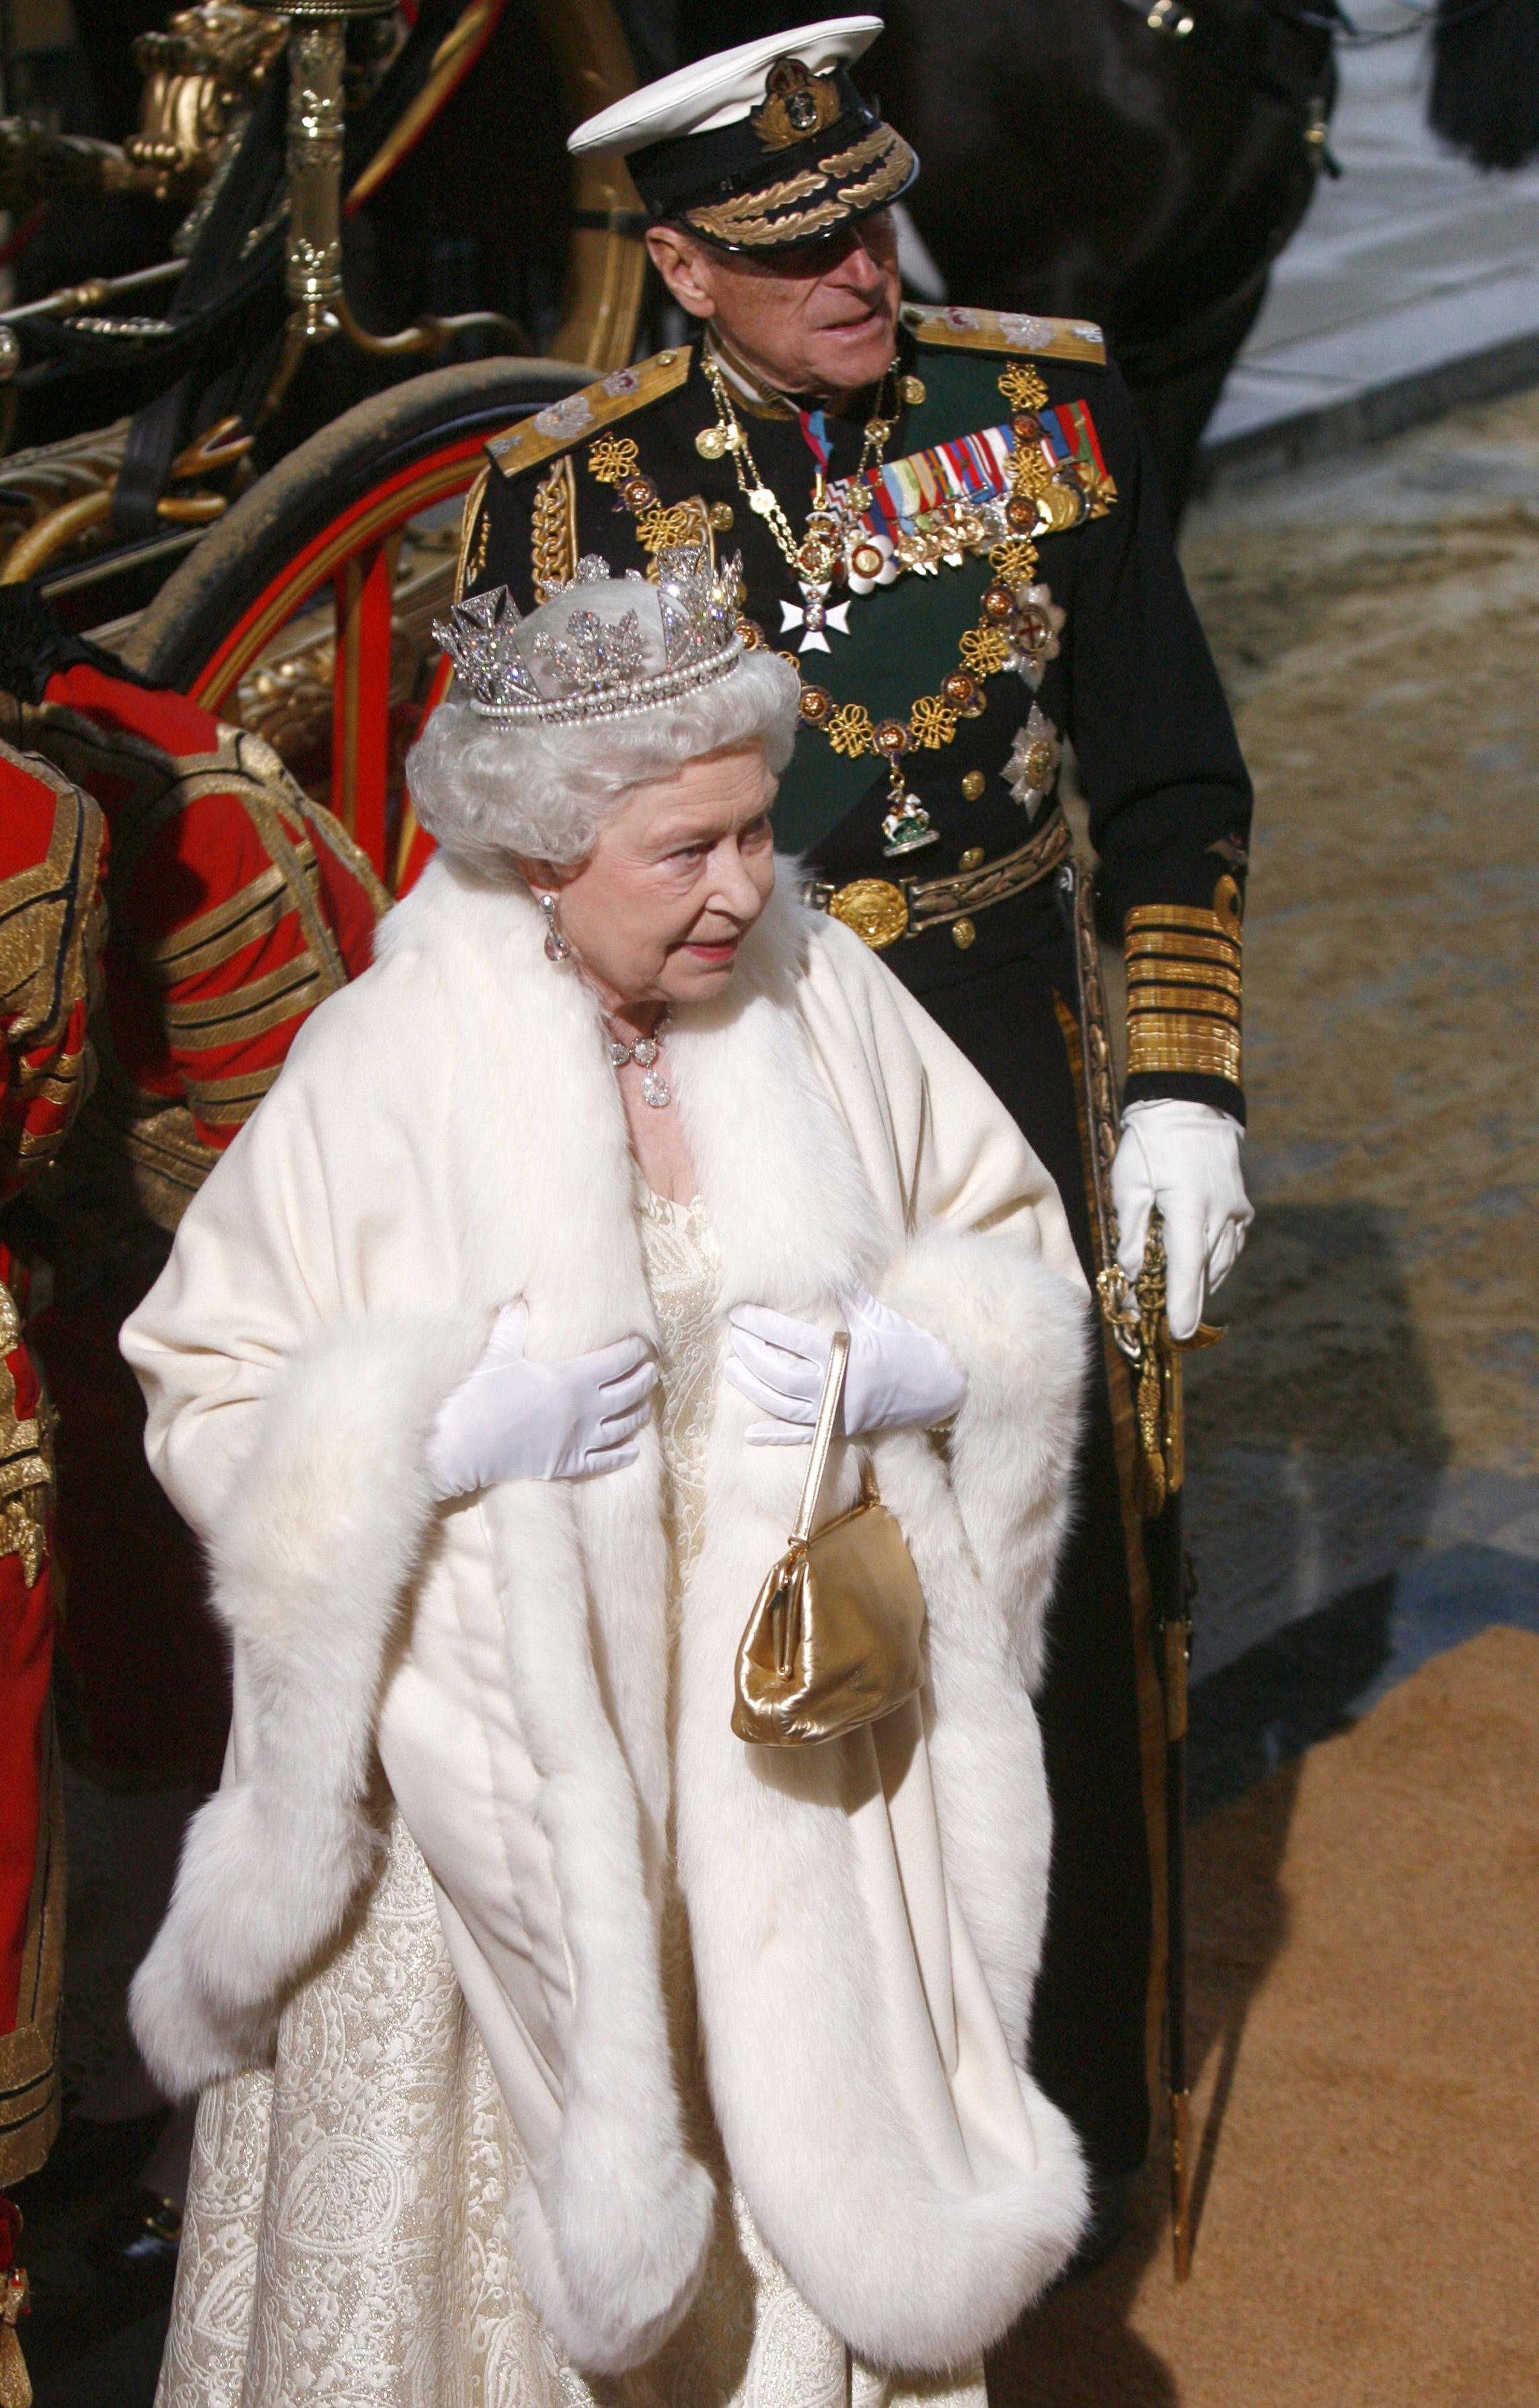 Britain's Queen Elizabeth II (L) and Prince Philip, the Duke of Edinburgh arrive in a horse-drawn carriage at the Houses of Parliament in central London for the State Opening of Parliament, in London, on November 18, 2009. British Prime Minister Gordon Brown unveiled a crackdown on the banking industry Wednesday as part of a voter-friendly agenda designed to boost its chances at elections barely six months away. In a traditional Queen's Speech detailing its final legislative plans before ballots due by June, the government also put boosting growth and jobs as its top priority as Britain emerges from the global slowdown. (Photo credit JOHNNY GREEN/AFP via Getty Images)